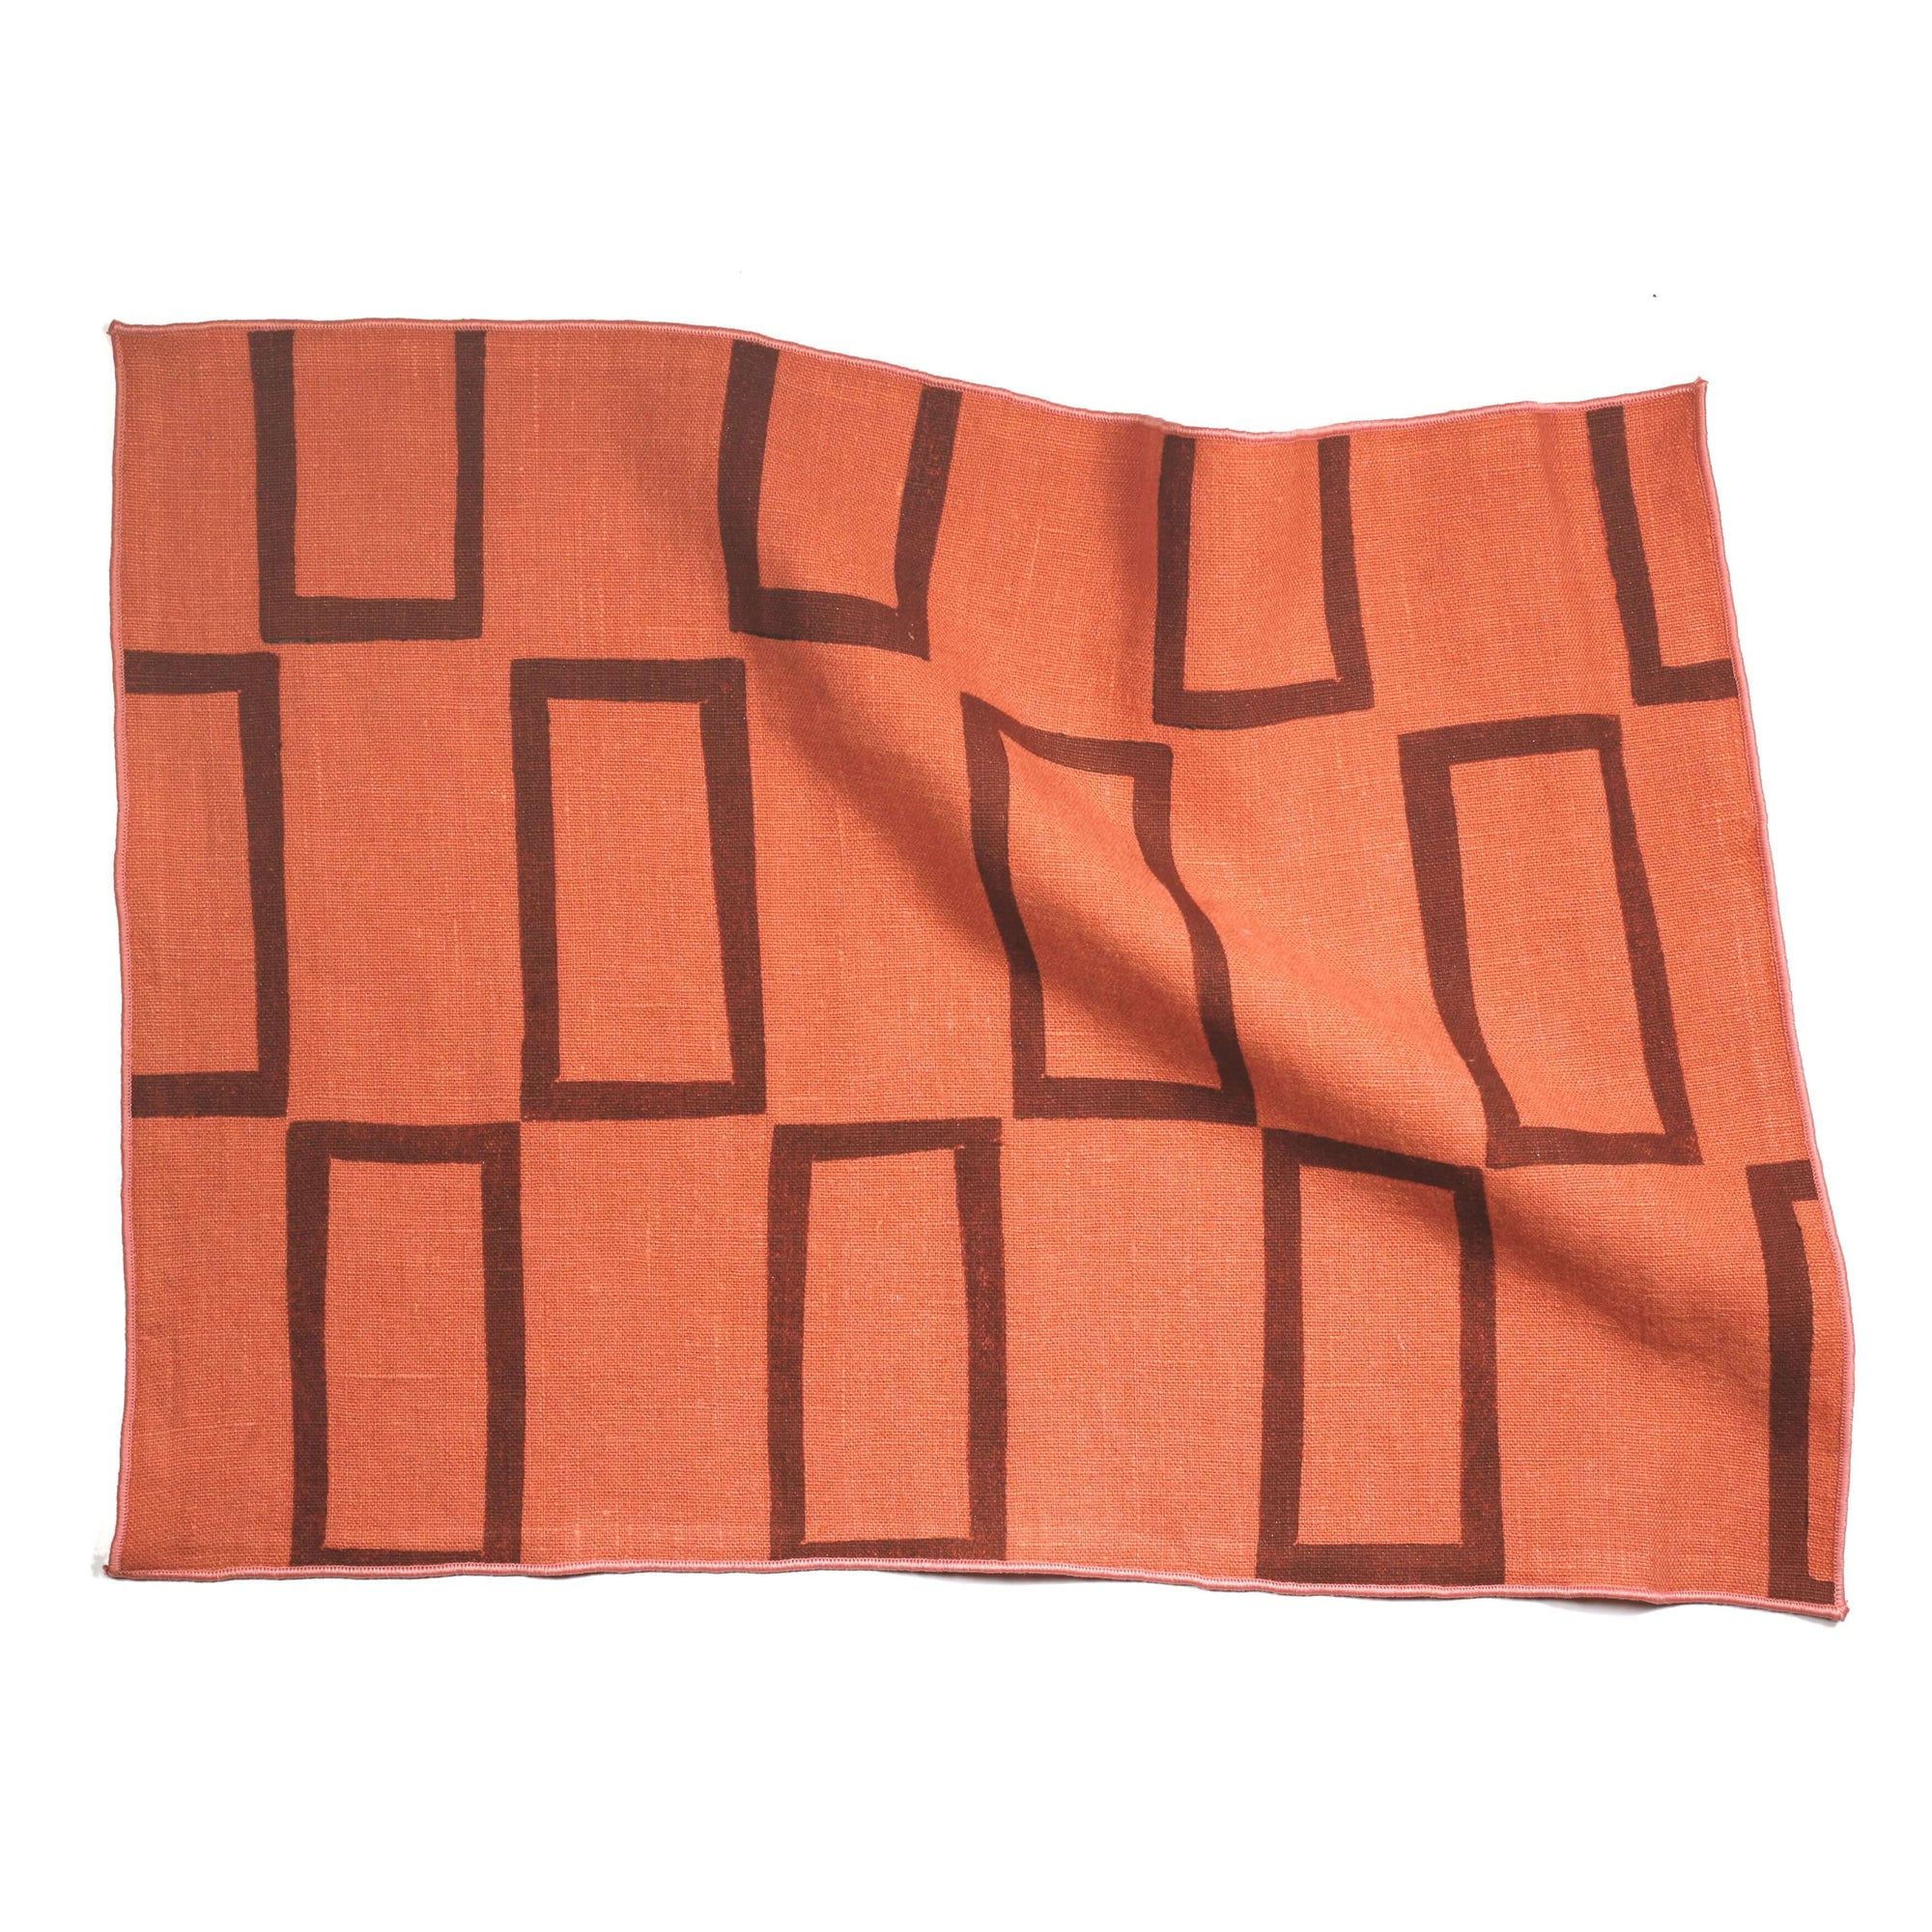 'Windows' Hand-Printed 100% Linen Placemats, Salmon colorway - Set of 2